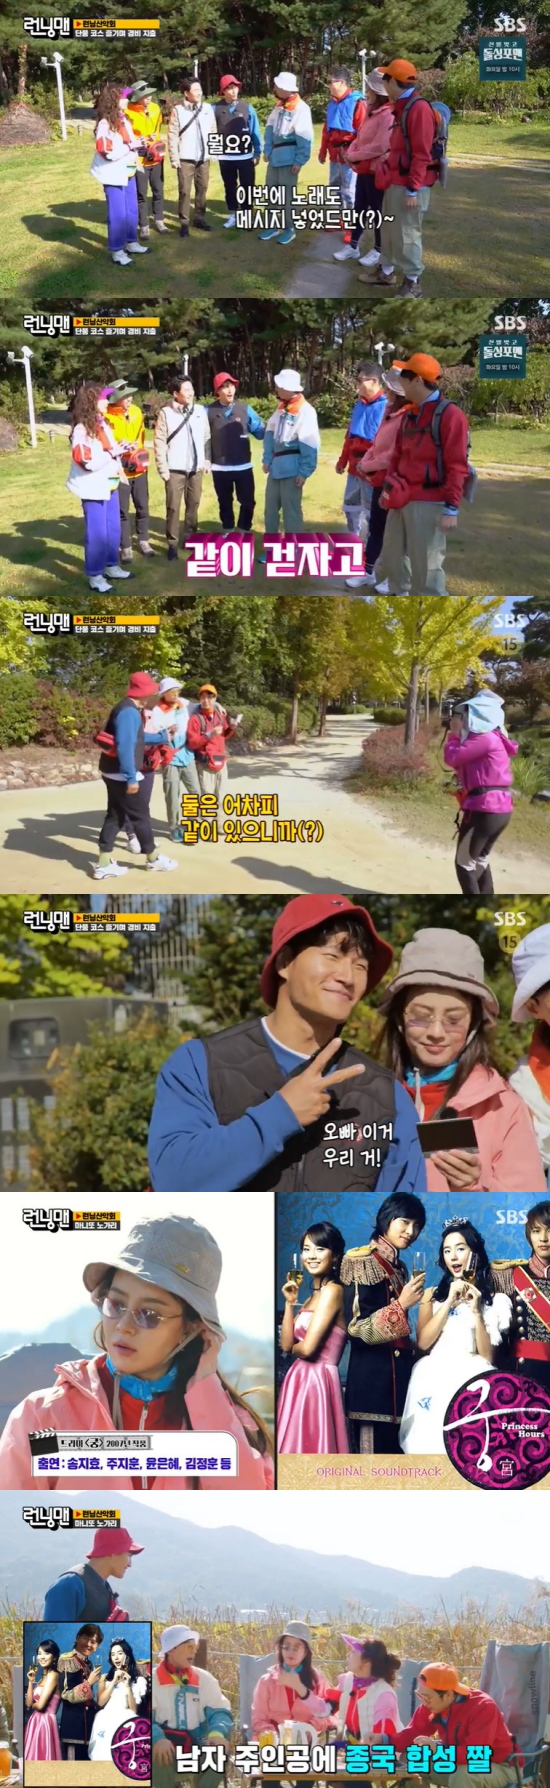 On SBS Running Man broadcasted on the 7th, Yoo Jae-Suk was featured in the My Money-Running Mountain Club Race, and the scene of Kim Jong-kook and Chae Yeons past anecdotes was broadcast.On this day, Yoo Jae-Suk encouraged Kim Jong-kook and Song Ji-hyos love line in the process of setting a rickshaw together.Ji Suk-jin asked Kim Jong-kook and his best friend Jang Hyuk, Is Ji Suk-jin a yes or no, and Jang Hyuk showed off his witty gesture, saying, Its a step to know what.Yoo Jae-Suk also said, I put a message on the song, lets walk together. Kim Jong-kooks new song I want to walk.Yoo Jae-Suk said, Why do you suddenly sing at this time of year? And Haha said, It is a rare timing.Furthermore, Yoo Jae-Suk took group photos with Haha, Kim Jong-kook and Song Ji-hyo, and said to take four.Kim Jong-kook said, What are you taking four pictures? And Yoo Jae-Suk said, You should have one. (Song Ji-hyo) is with us anyway, he nailed; Song Ji-hyo showed Kim Jong-kook the picture, and helped him, This is ours.Not only that, Jeon So-min delivered news of the drama The Palace remake, and Yoo Jae-Suk said, (Song Ji-hyo) came out on the Palace, which I forgot.So it is coarse, Kim Jong-kook said. Lets do it properly. However, Jeon So-min said, The man Actors face is a piece of synthetic brother. Kim Jong-kook confessed, I saw it.Especially Ji Suk-jin said, Tell me about that.There is a story that Chae Yeon liked you, Kim Jong-kook said. Chae Yeon had a star date with me in high school.I met him as an entertainer on the air, he recalled.Yoo Jae-Suk said: There was a program before where stars and fans met, wed spend two days together.At that time, Chae Yeon applied as a fan under the real name of Jin Sook before making his debut in the entertainment industry.Then when the camera goes off, do you drink? said Jeon So-min, who wondered, and Kim Jong-kook said, (Chae Yeon was) a high school student.Yoo Jae-Suk added, But later, they met at X-Men. Haha added, Chae Yeon Sister said, Do you remember me?My brother opened his eyes and said, How are you?Kim Jong-kook explained, I first said, How are you, a real girl? and the production team released a video of X-Men (X-Men) in the past.Kim Jong-kook said, Its been a long time since I was a young man. I was a big girl.Photo = SBS broadcast screen